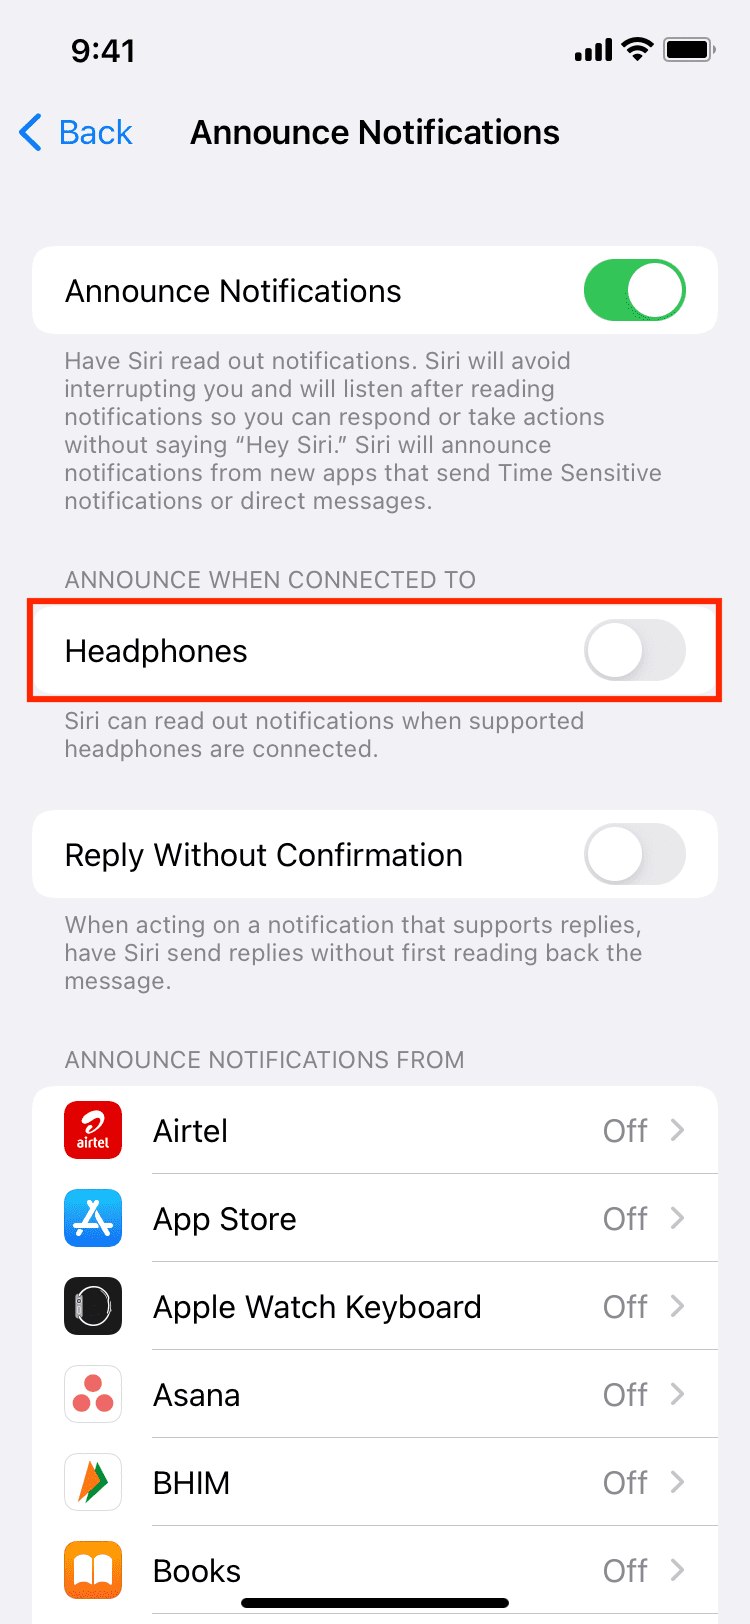 Announce Notifications turned off for Headphones on iPhone